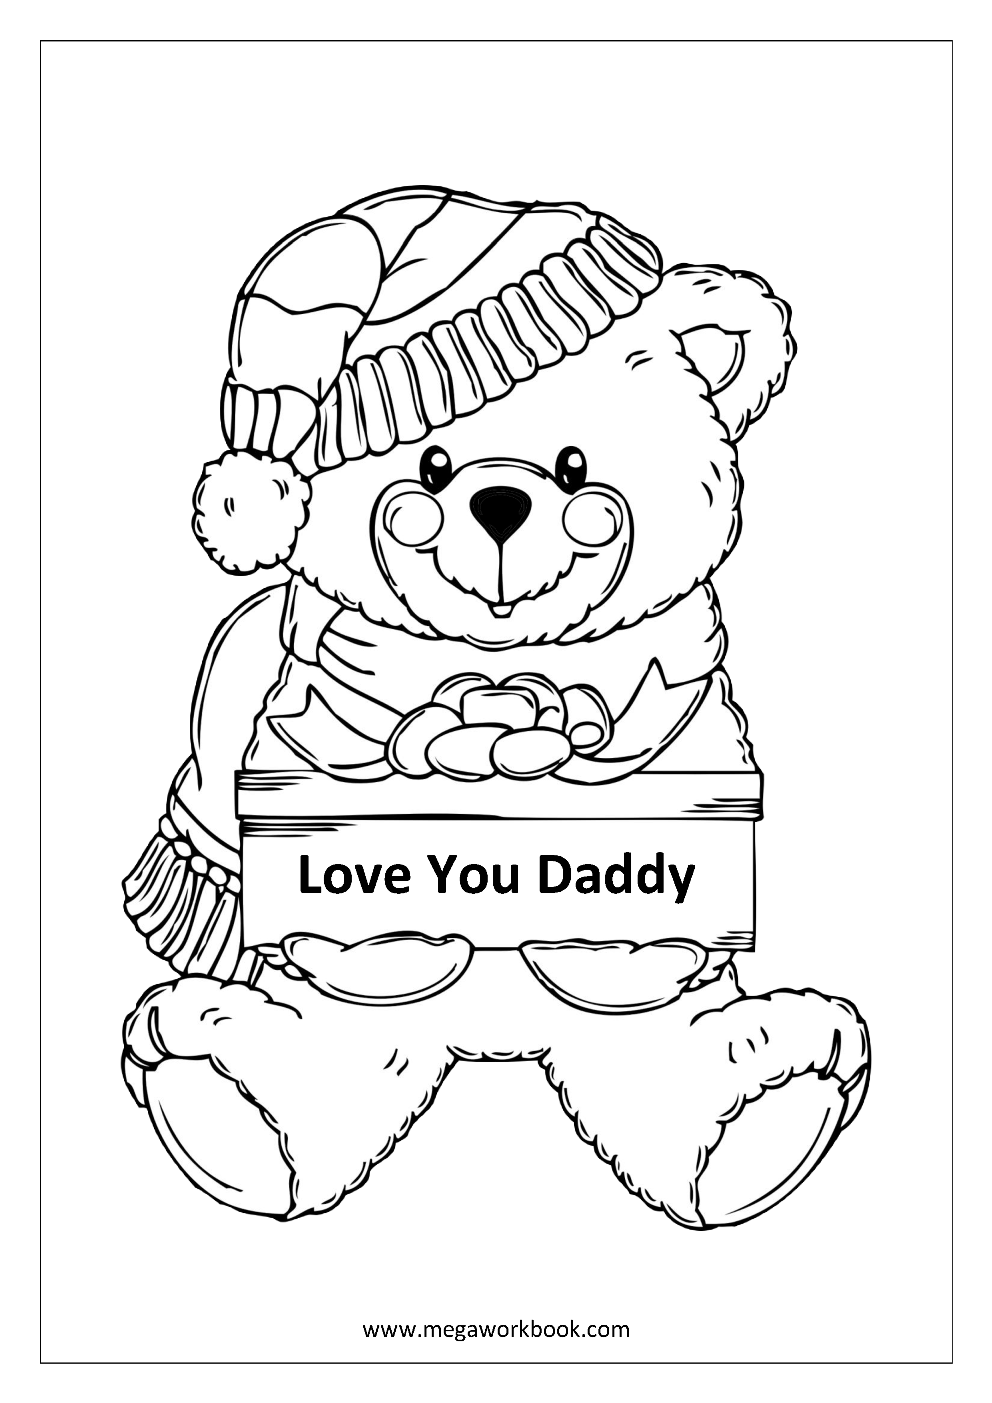 Free Printable Father's Day (Fathers Day) Coloring Pages for Kids  (Kindergarten and Preschool) - MegaWorkbook